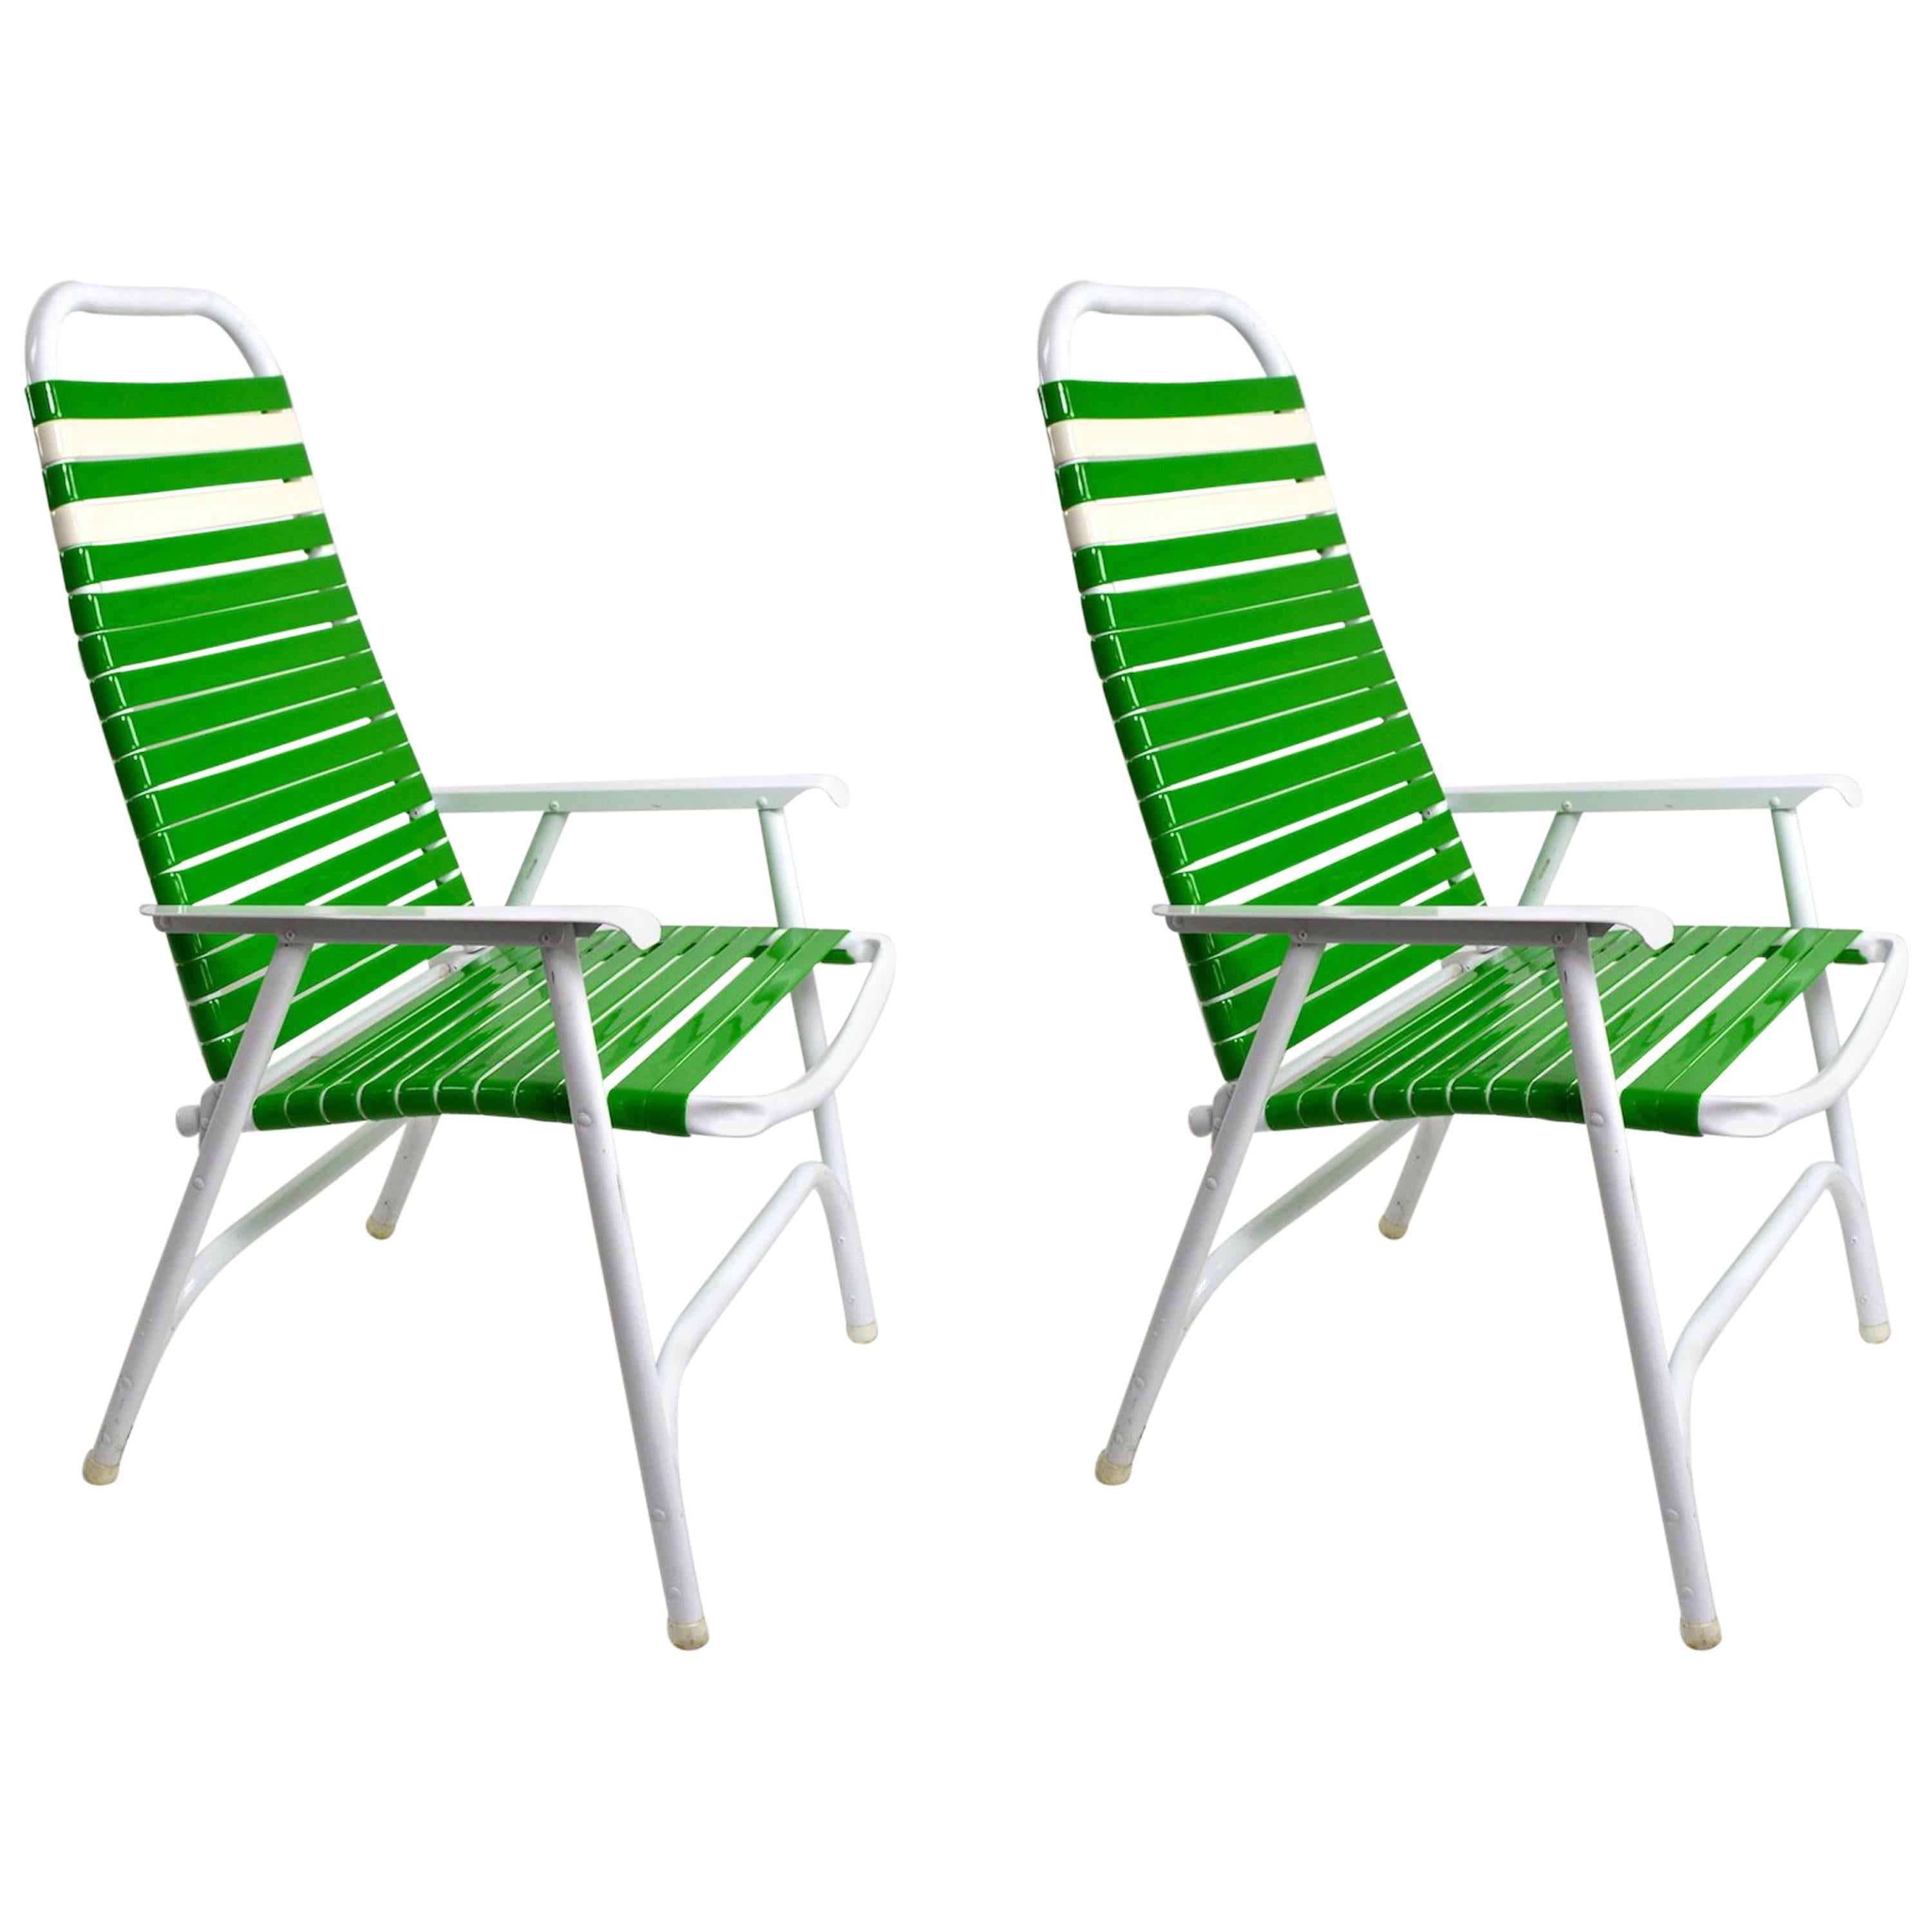 Pair of Lawn Chairs by Telescope Furniture Company